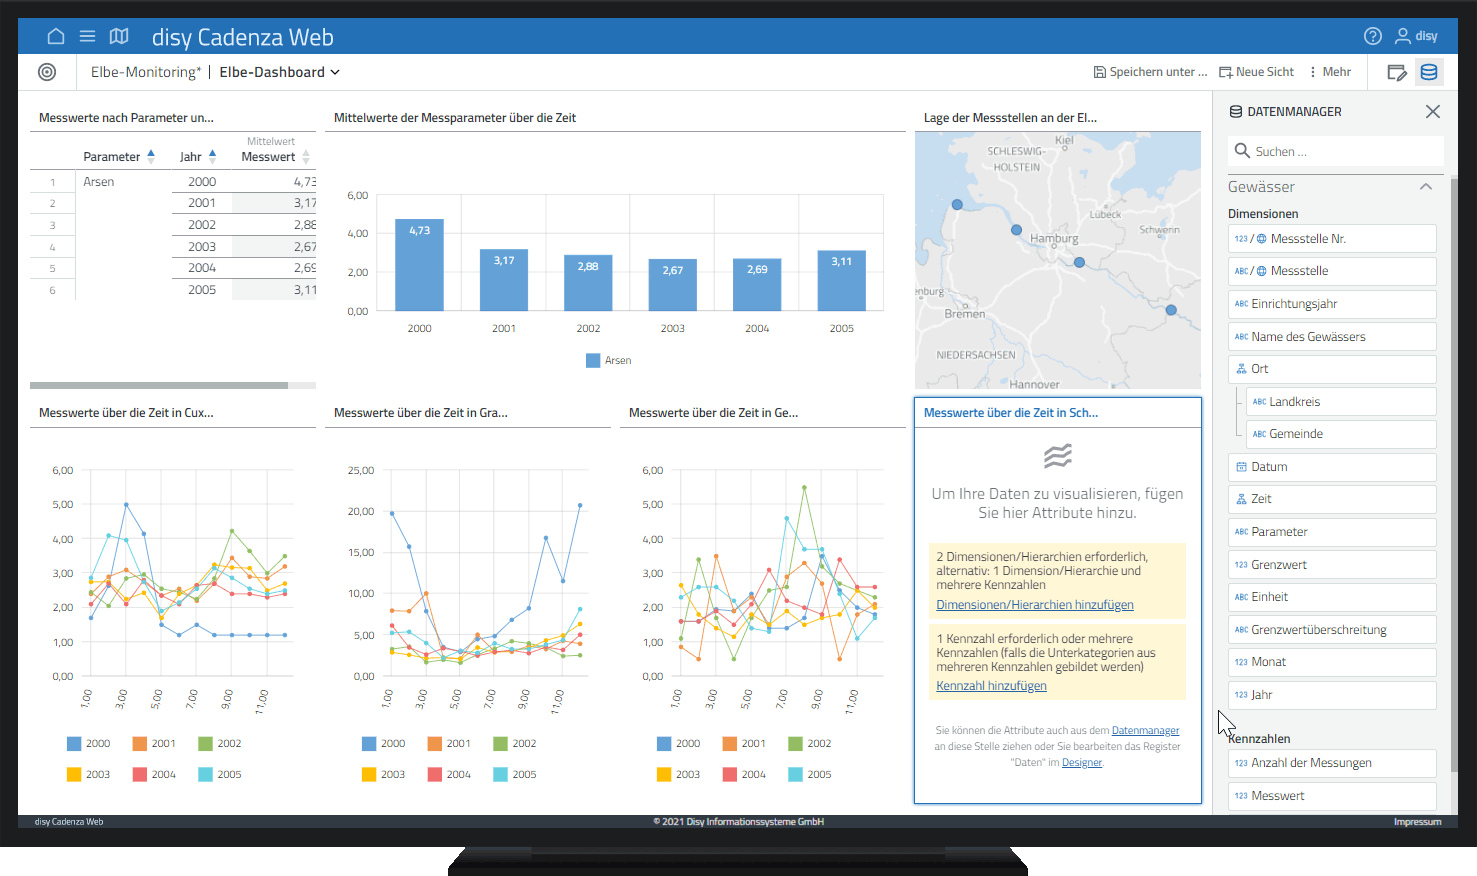 Compiling your own dashboard in the disy Cadenza data analysis software